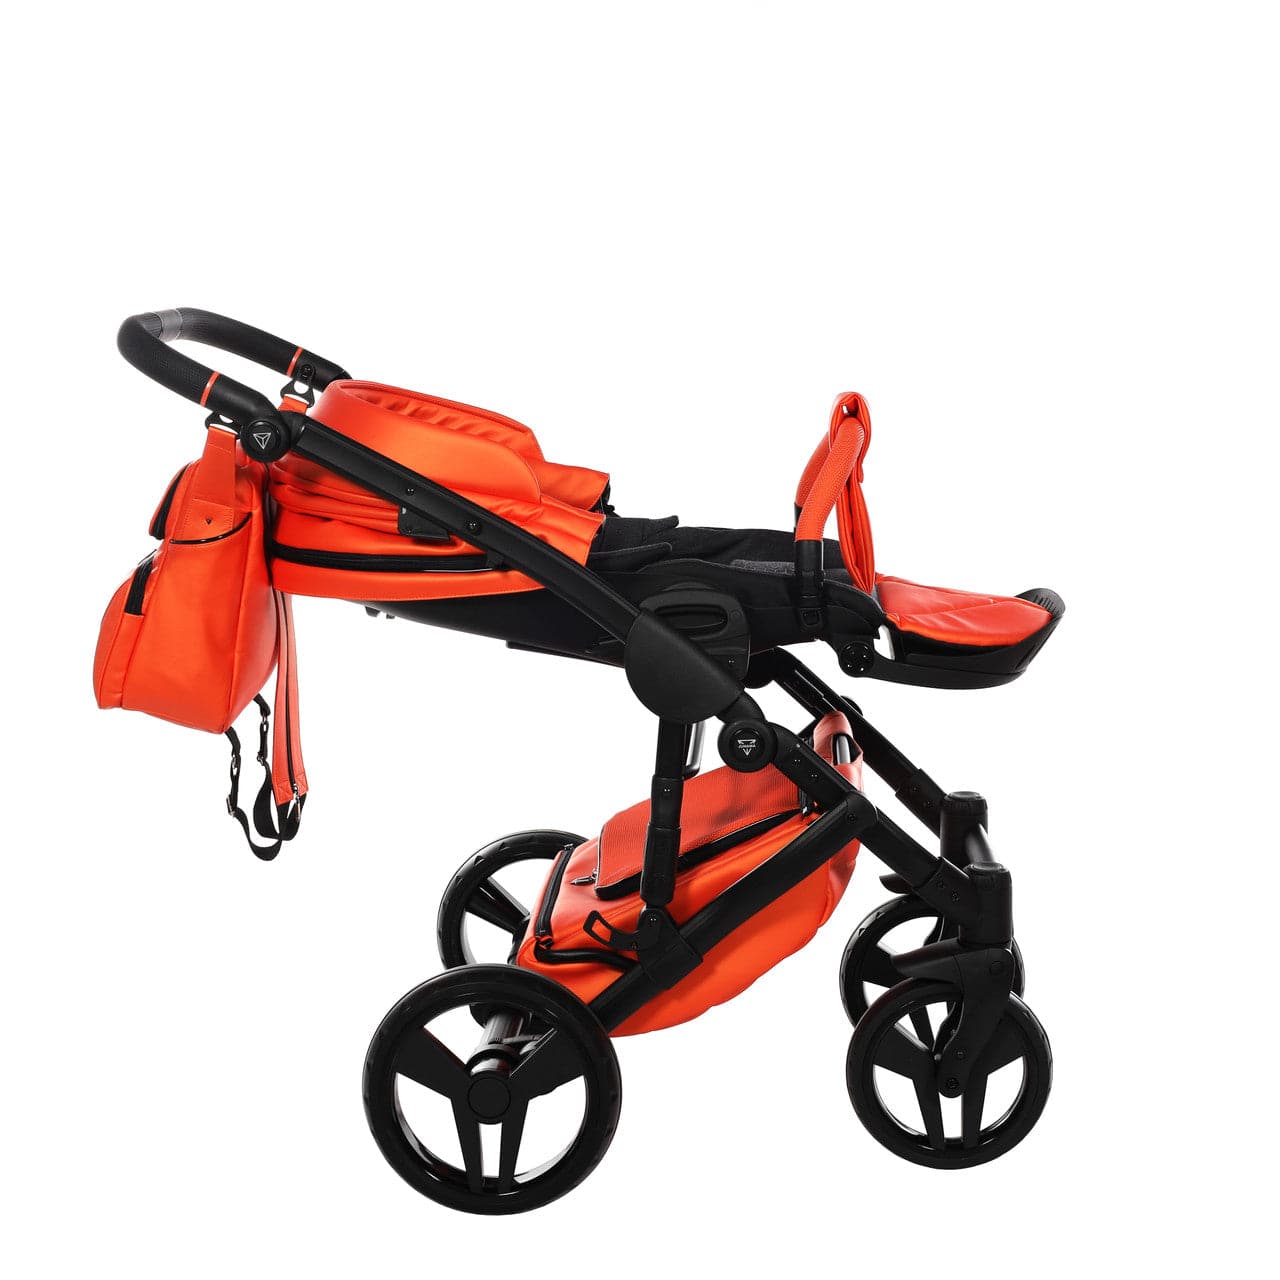 Junama S-Class 3 In 1 Travel System - Orange - For Your Little One